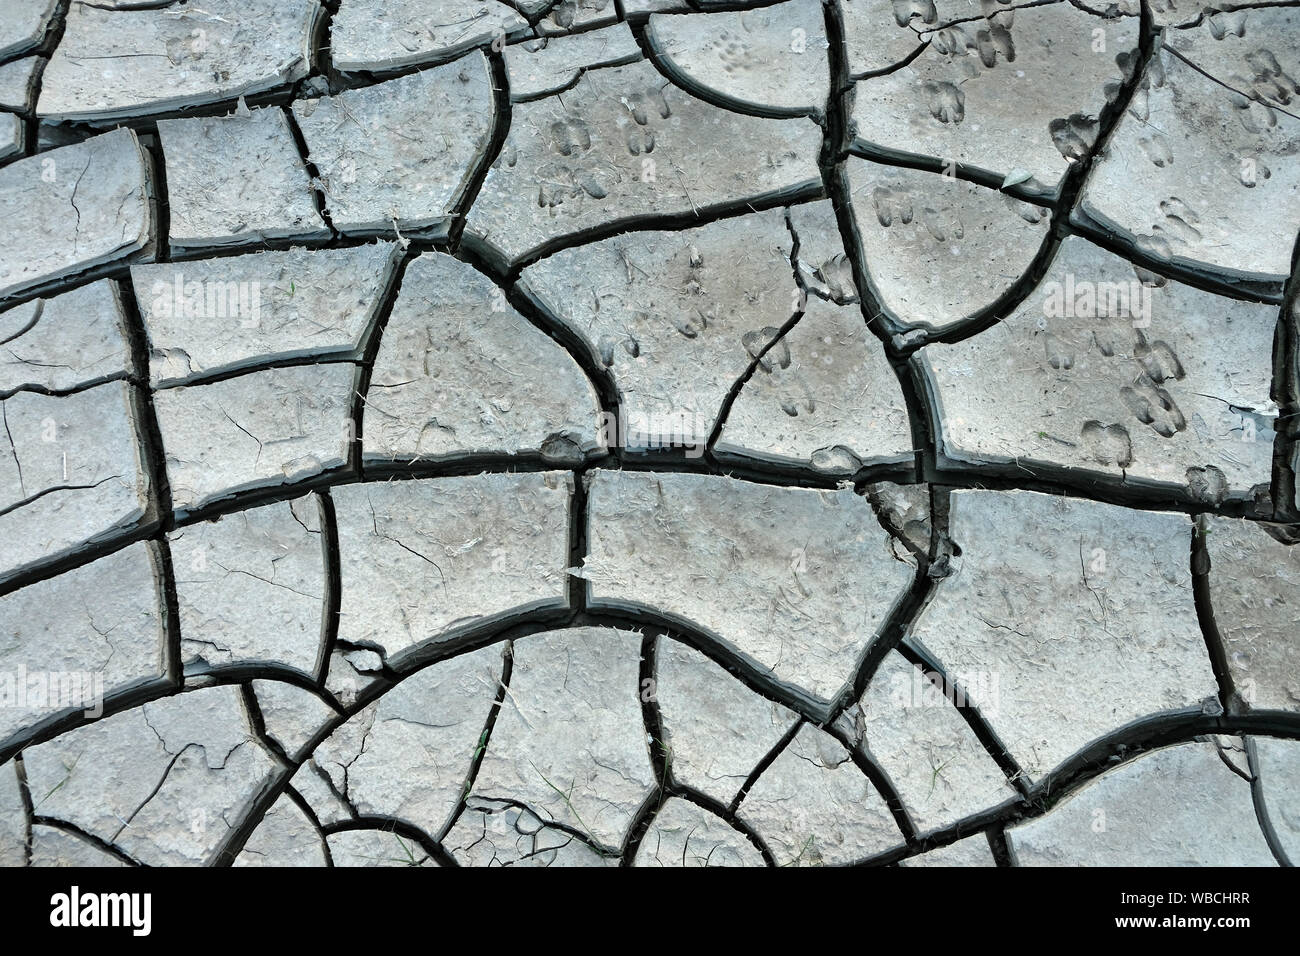 the global climate change is a threat to the world. debris of dehydrated soils form interesting shapes Stock Photo